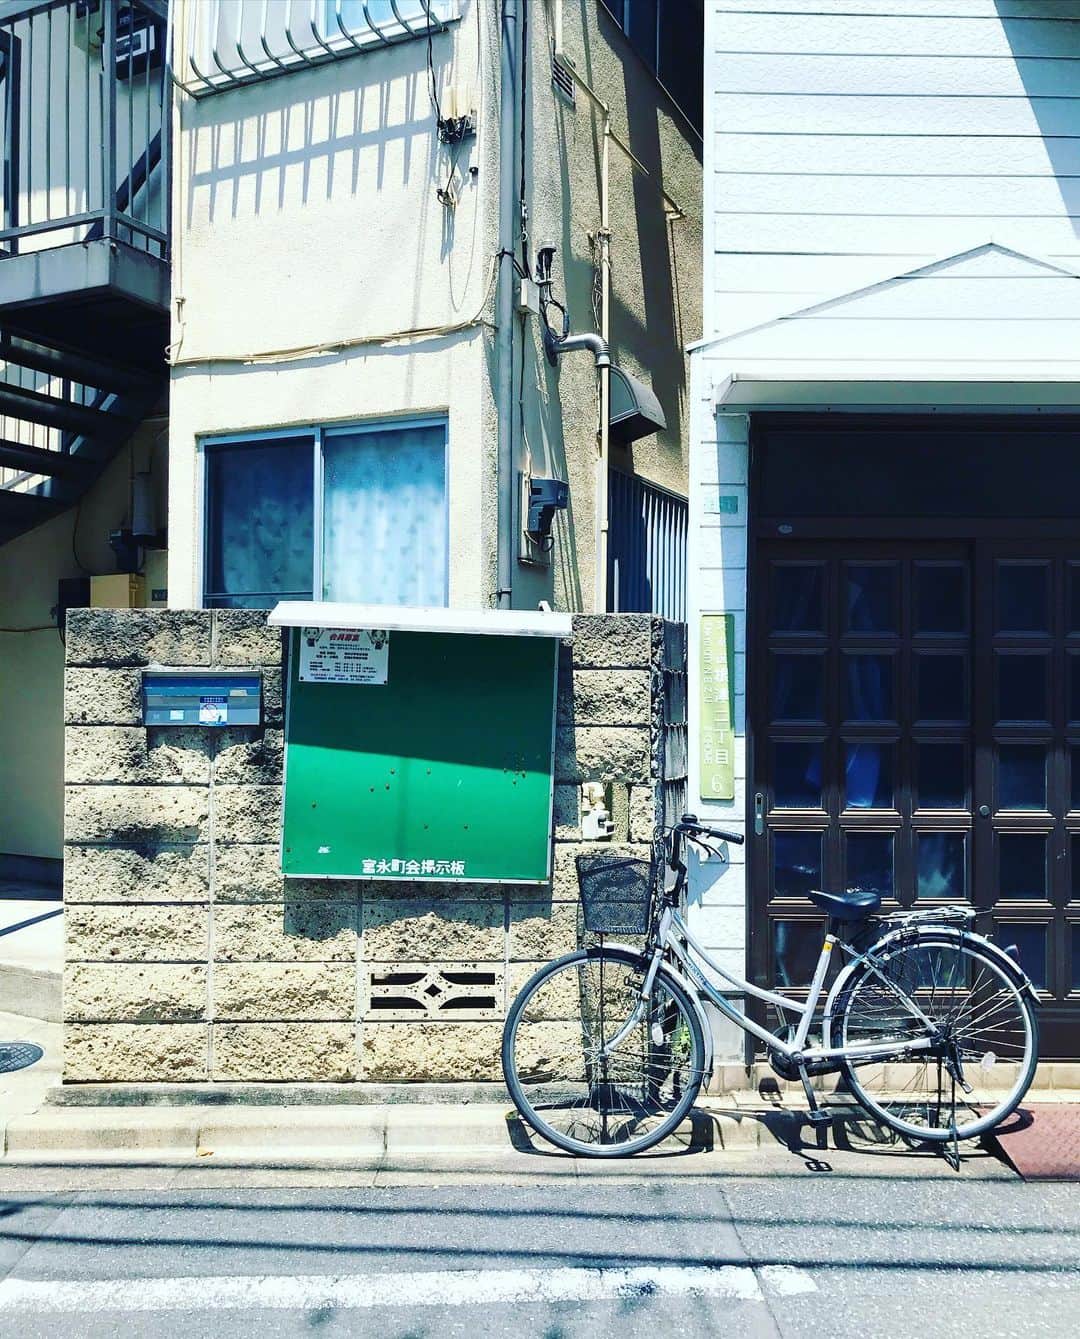 hotelgraphynezuさんのインスタグラム写真 - (hotelgraphynezuInstagram)「根津・上野周辺は親切でフレンドリーな人々、四季を彩る花々や自然に囲まれており、自転車で散策するには最適な場所です。  ホテルグラフィー根津では、1時間200円、1日最大1200円で自転車のレンタルサービスを行なっておりますので、レンタサイクルをお探しの際は是非ご利用下さい。  自転車に乗って、出掛けよう！ ご来店お待ちしております。^^ ————————————————————————-Nezu and Ueno neighborhood are two pleasant areas to ride a bike safely surrounded by nature, flowers and good people !  For those who are looking for bicycles, Hotel Graphy Nezu offers bicycle rental service 1h/200yen 1day/1200yen.  Let’s go for a ride !  Come visit us @hotelgraphy_nezu ———————————————————————— #hotel #hotelgraphynezu #hostel #bicycle #ride #nezu #ueno #yanesen #tokyostreets #tokyolife #sunnydays #bicyclerental #promenade #myneighborhood #japantravel #japan #rentalservice  #ホテル #ホテルグラフィー根津 #ホステル #東京 #東京生活 #自転車 #自転車レンタル #レンタル #プロムナード #いい天気 #根津 #上野 #谷根千」6月10日 15時47分 - hotelgraphy_nezu